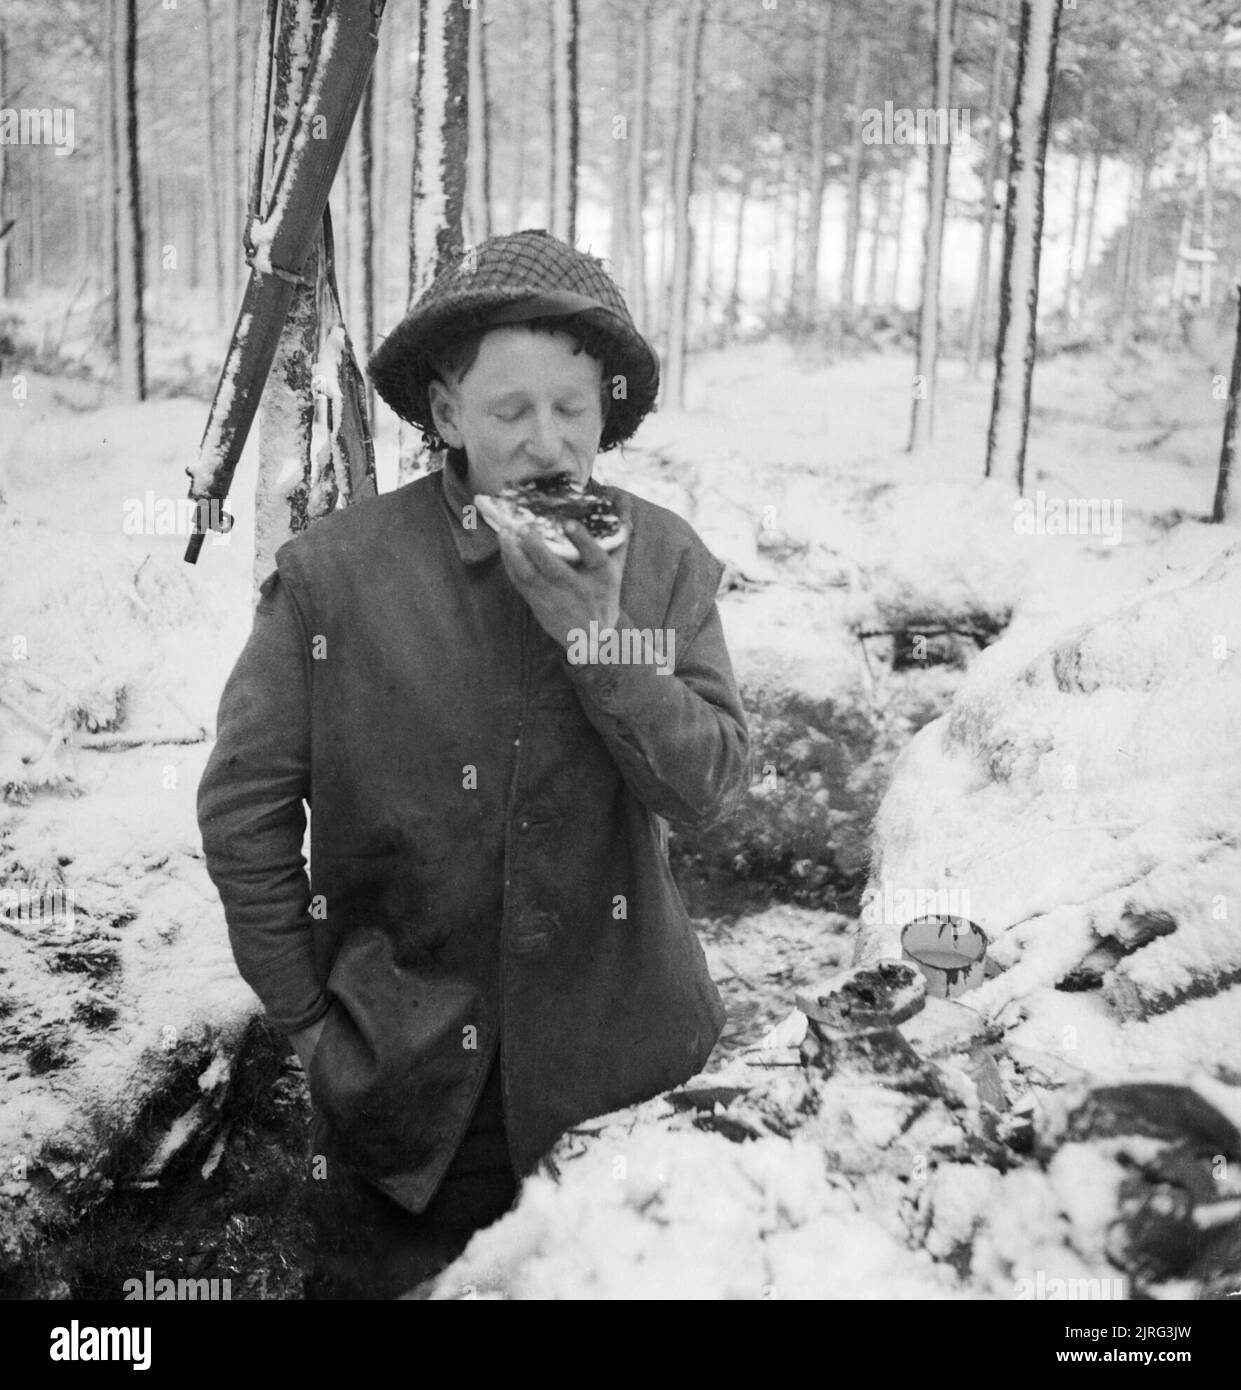 A British soldier eats his midday meal in a trench in the snow, while manning part of the front line along the River Maas in Holland, 8 January 1945. Private G Carnally eats his midday meal in a trench in the snow, while manning part of the front line along the River Maas in Holland, 8 January 1945. Stock Photo